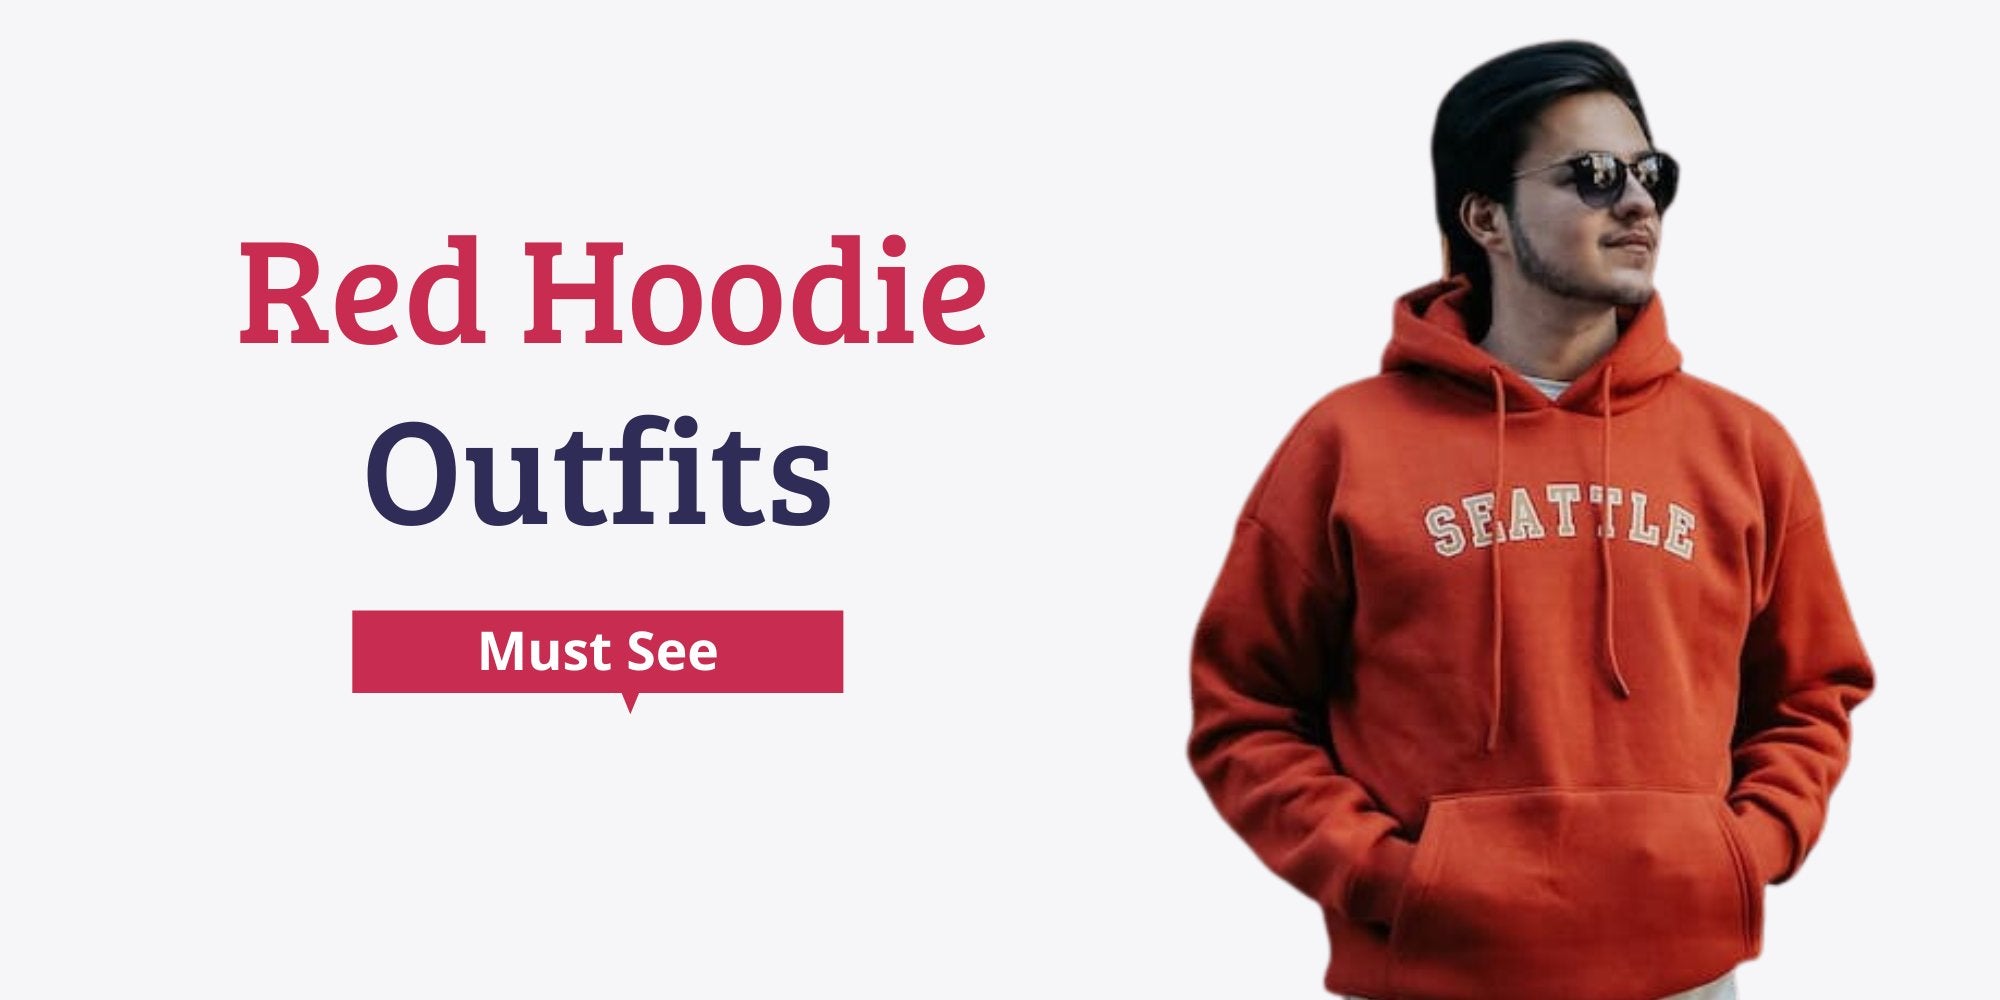 Red hoodie outfits